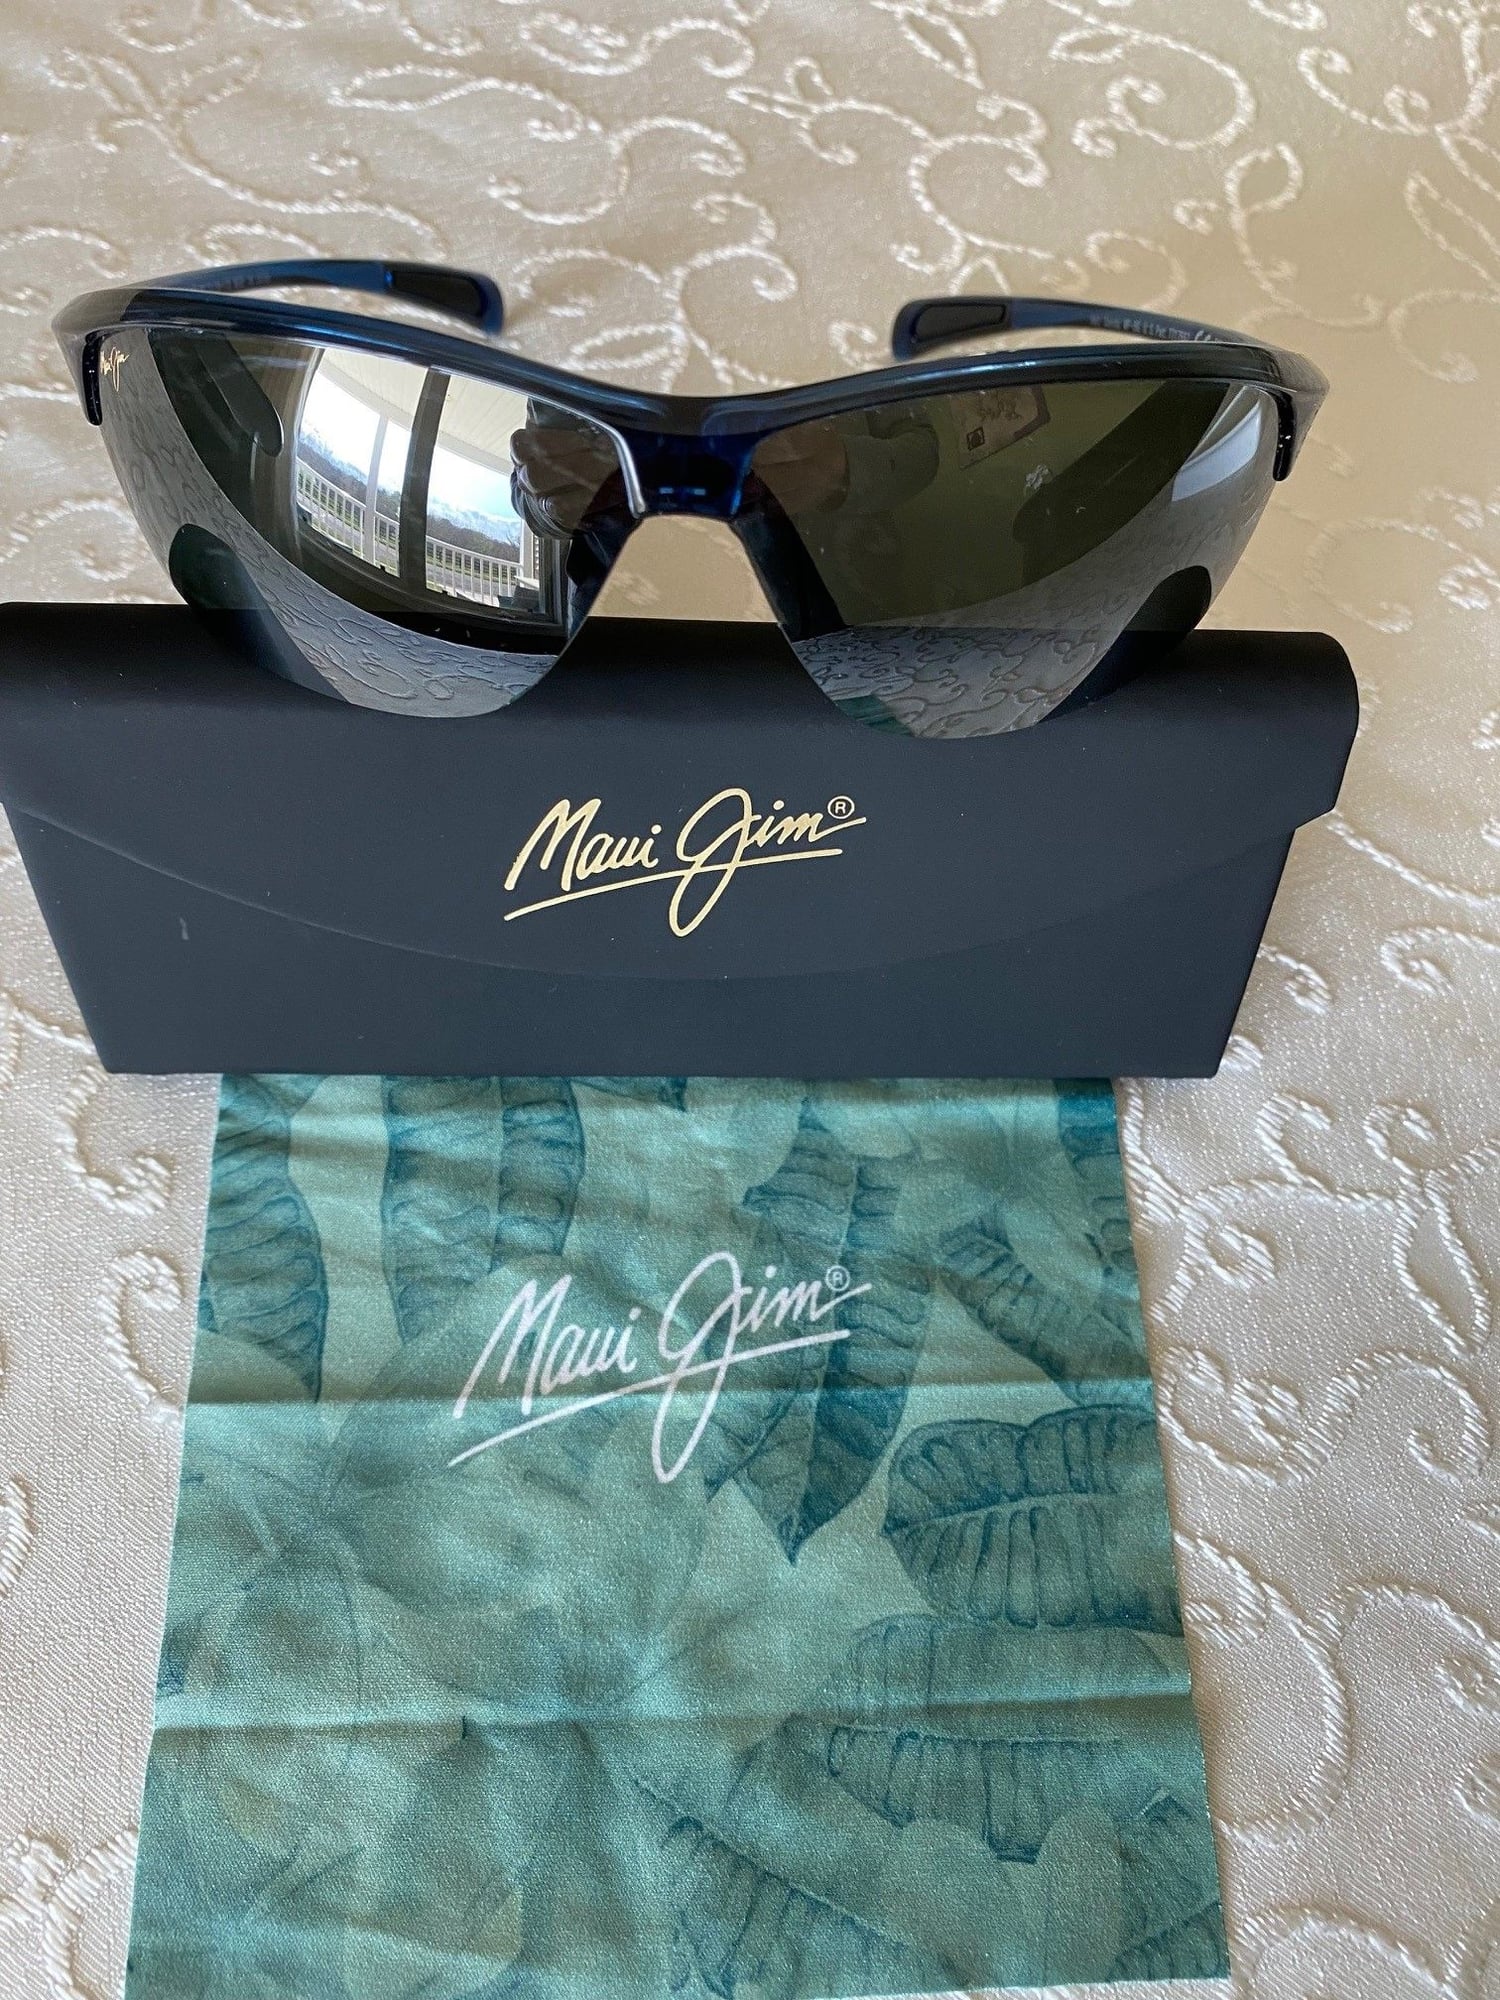 Maui Jim - Hot Sands - The Hull Truth - Boating and Fishing Forum